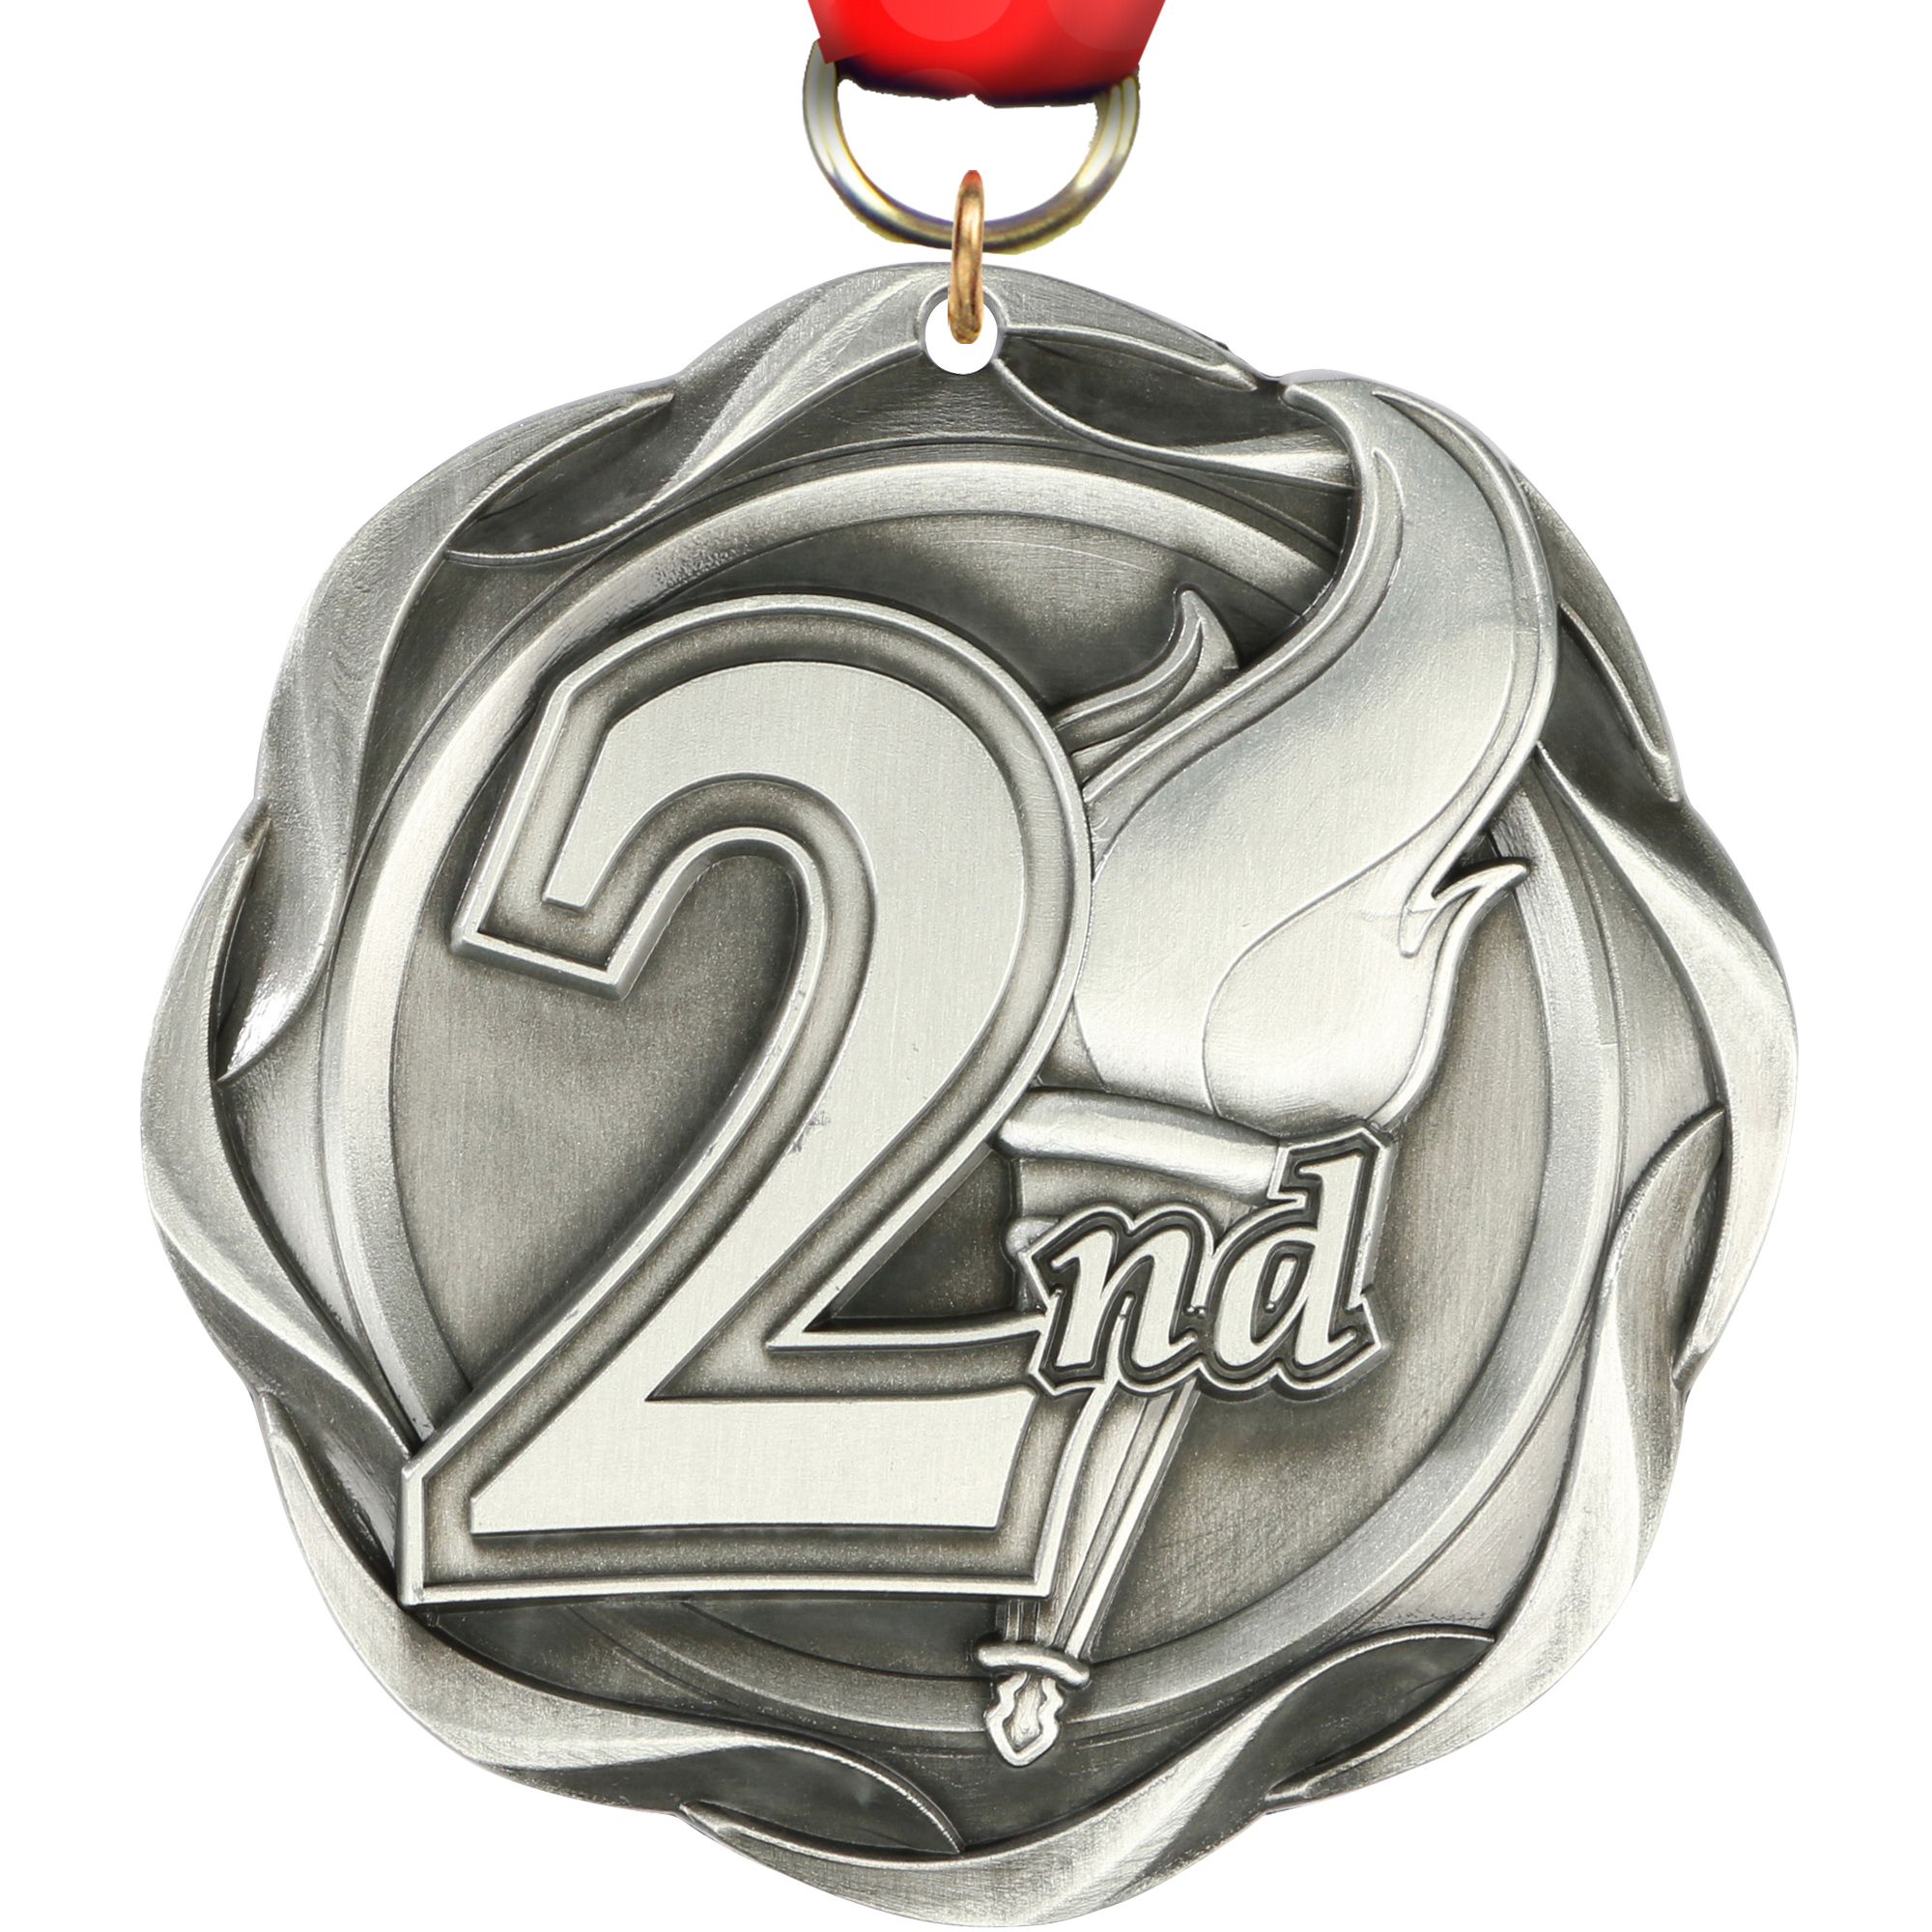 2nd Fusion Diecast Medal